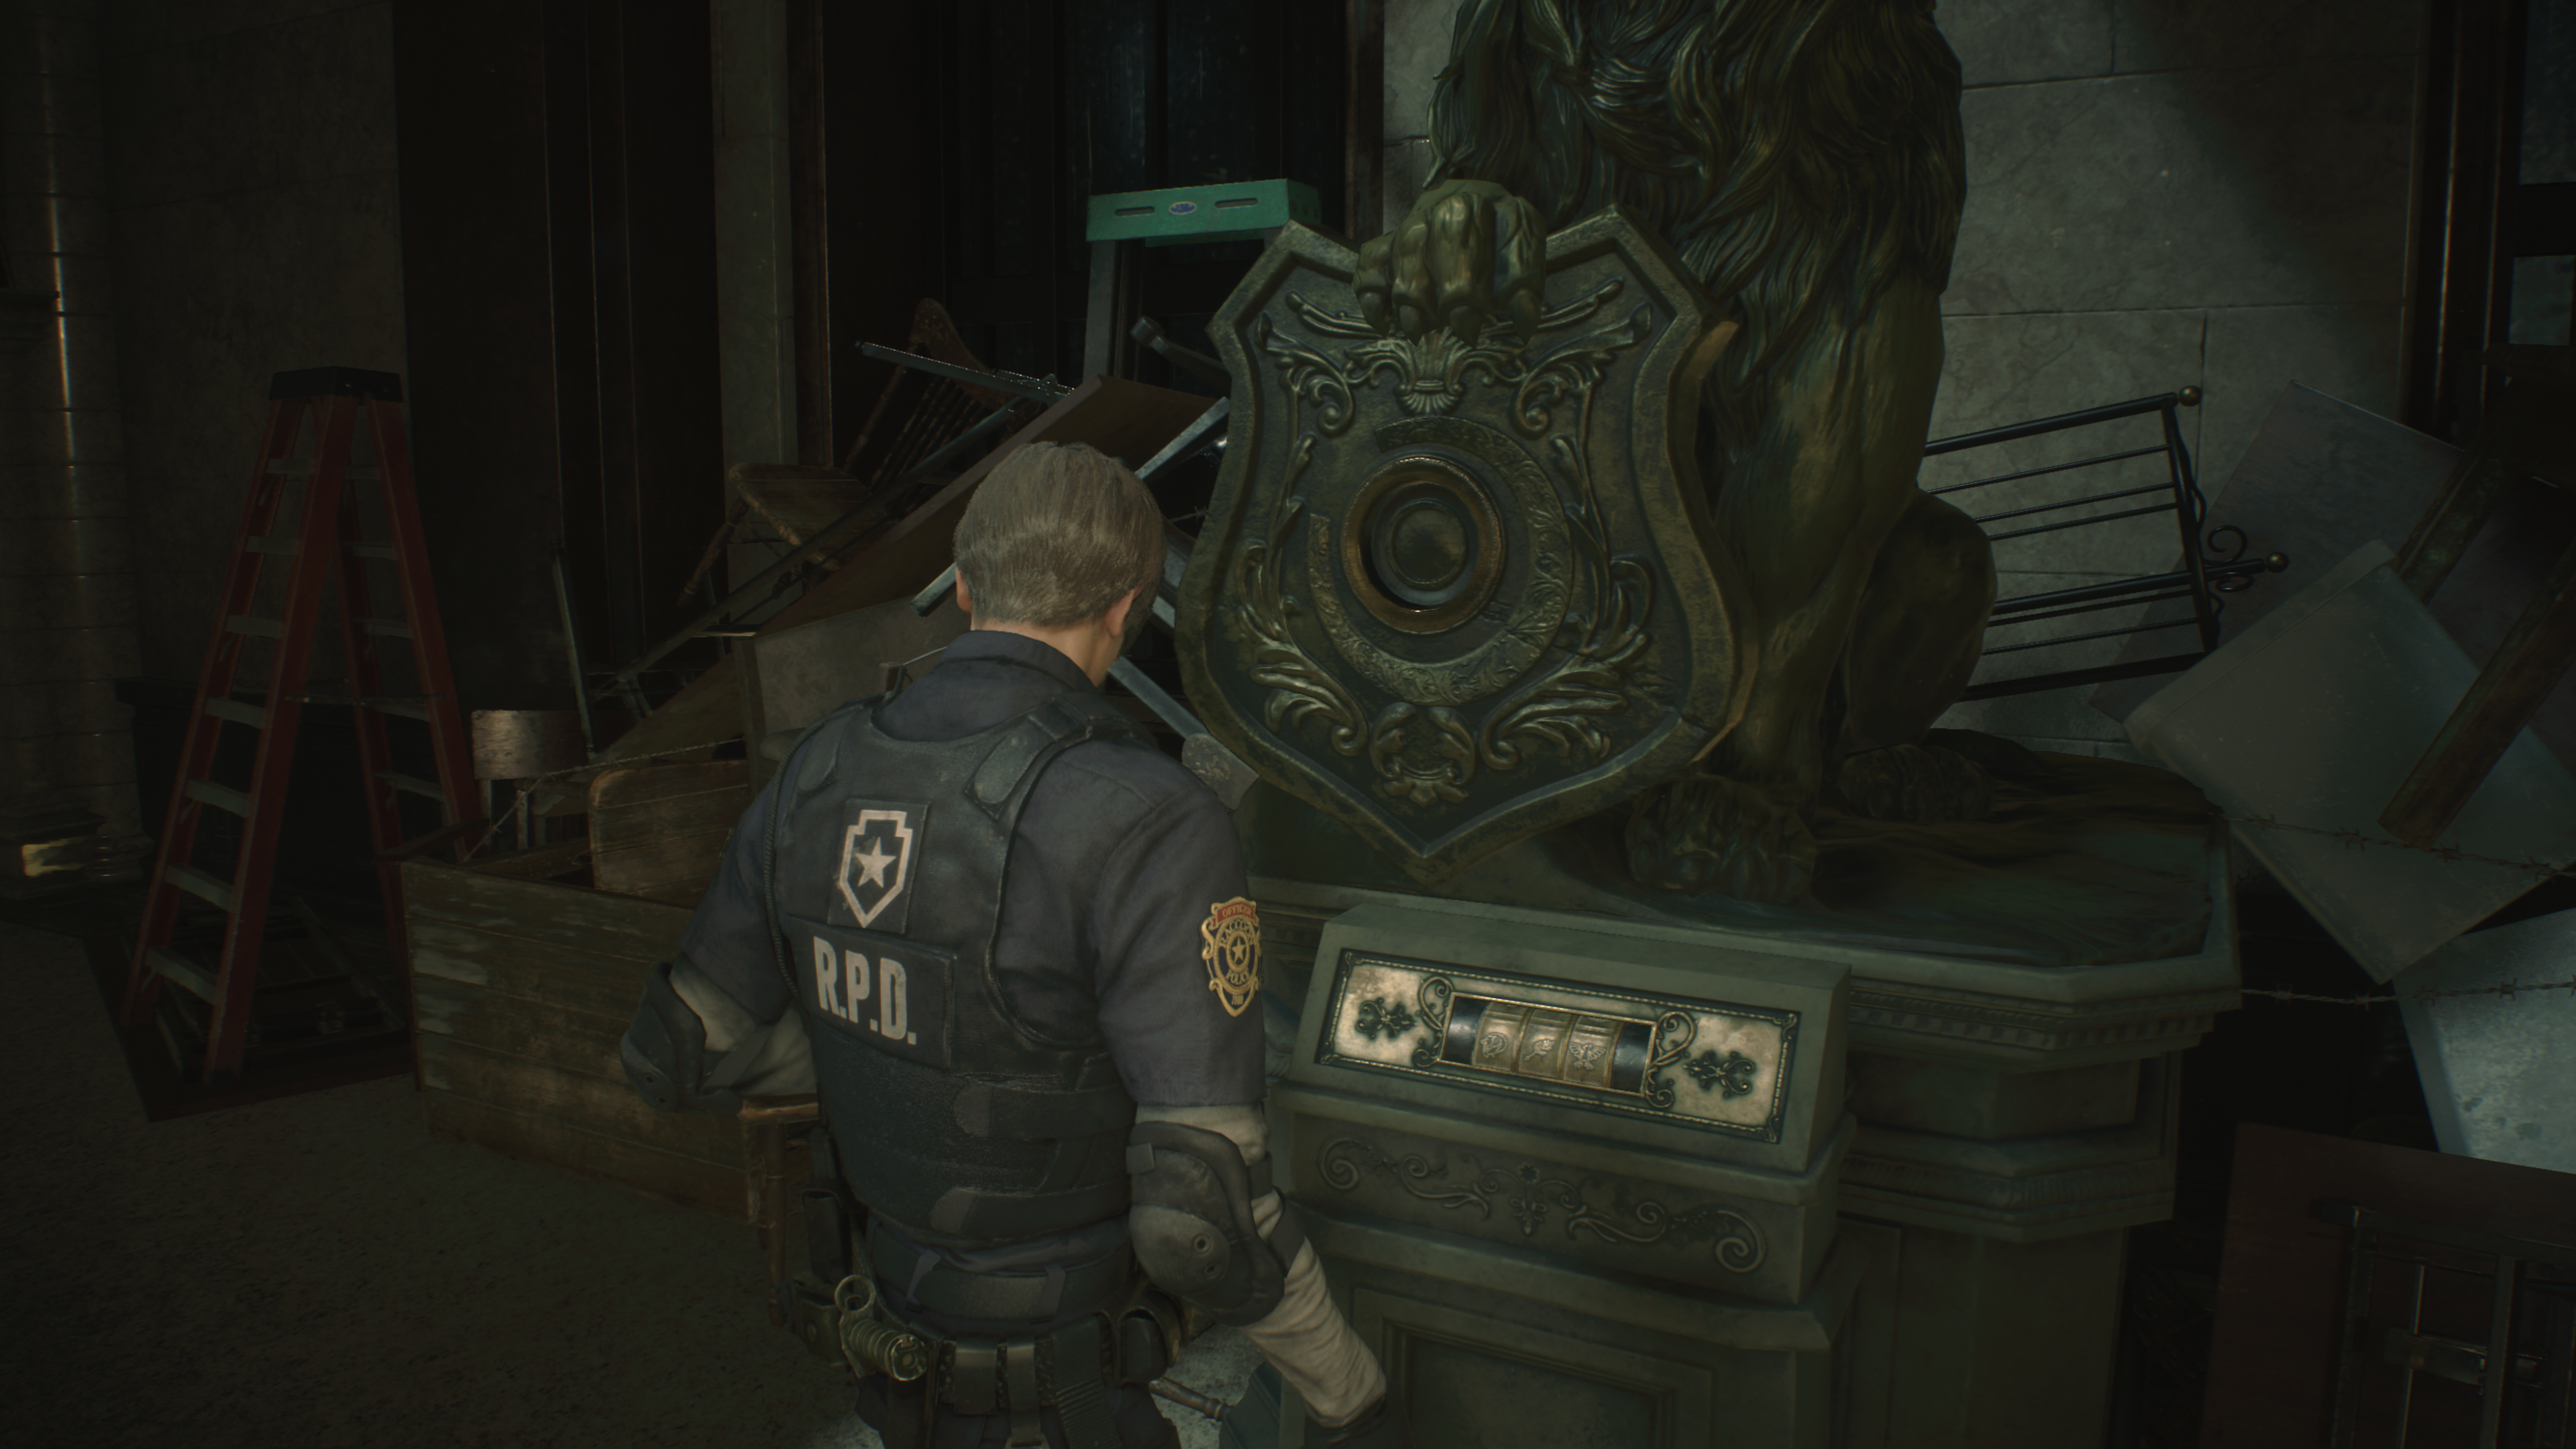 axe Sow Rather Resident Evil 2 Remake: where to find three medallions - lion, maiden, and  unicorn statue puzzle solutions for both playthroughs | VG247